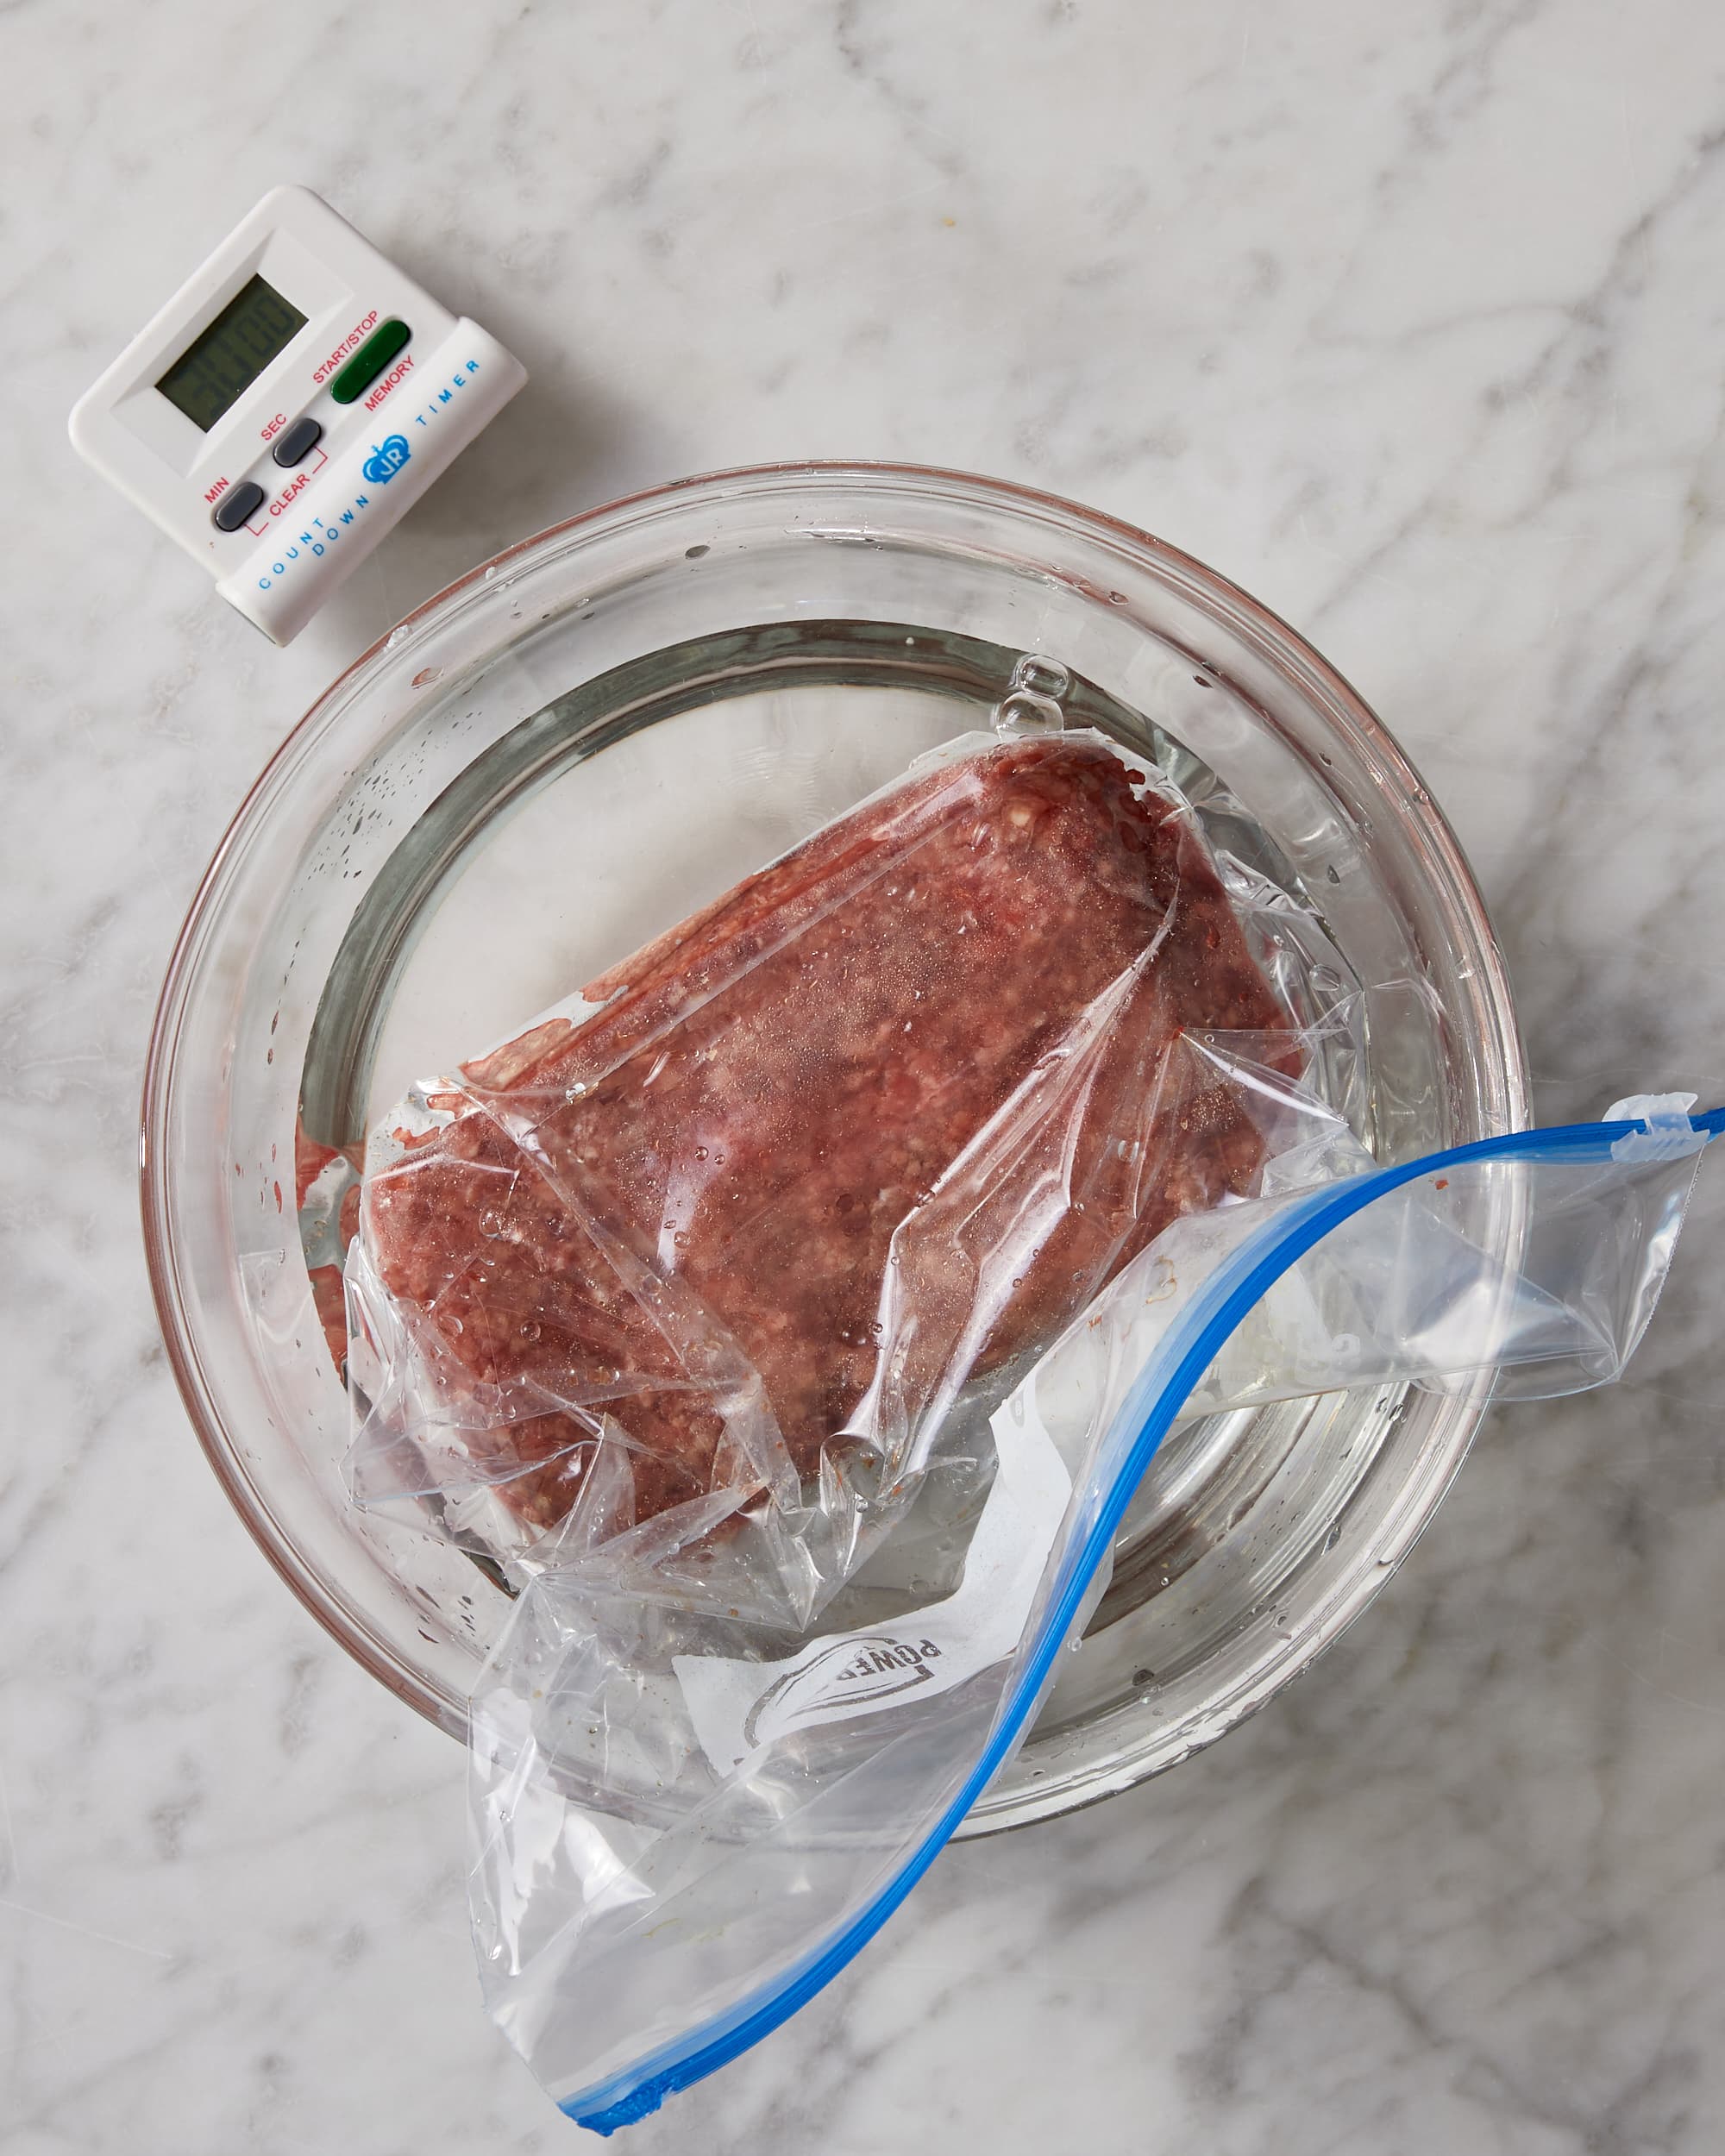 https://cdn.apartmenttherapy.info/image/upload/v1666963516/k/Photo/Recipes/2022-12-how-to-defrost-ground-beef/best_way_to_defrost_ground_beef_method_048.jpg